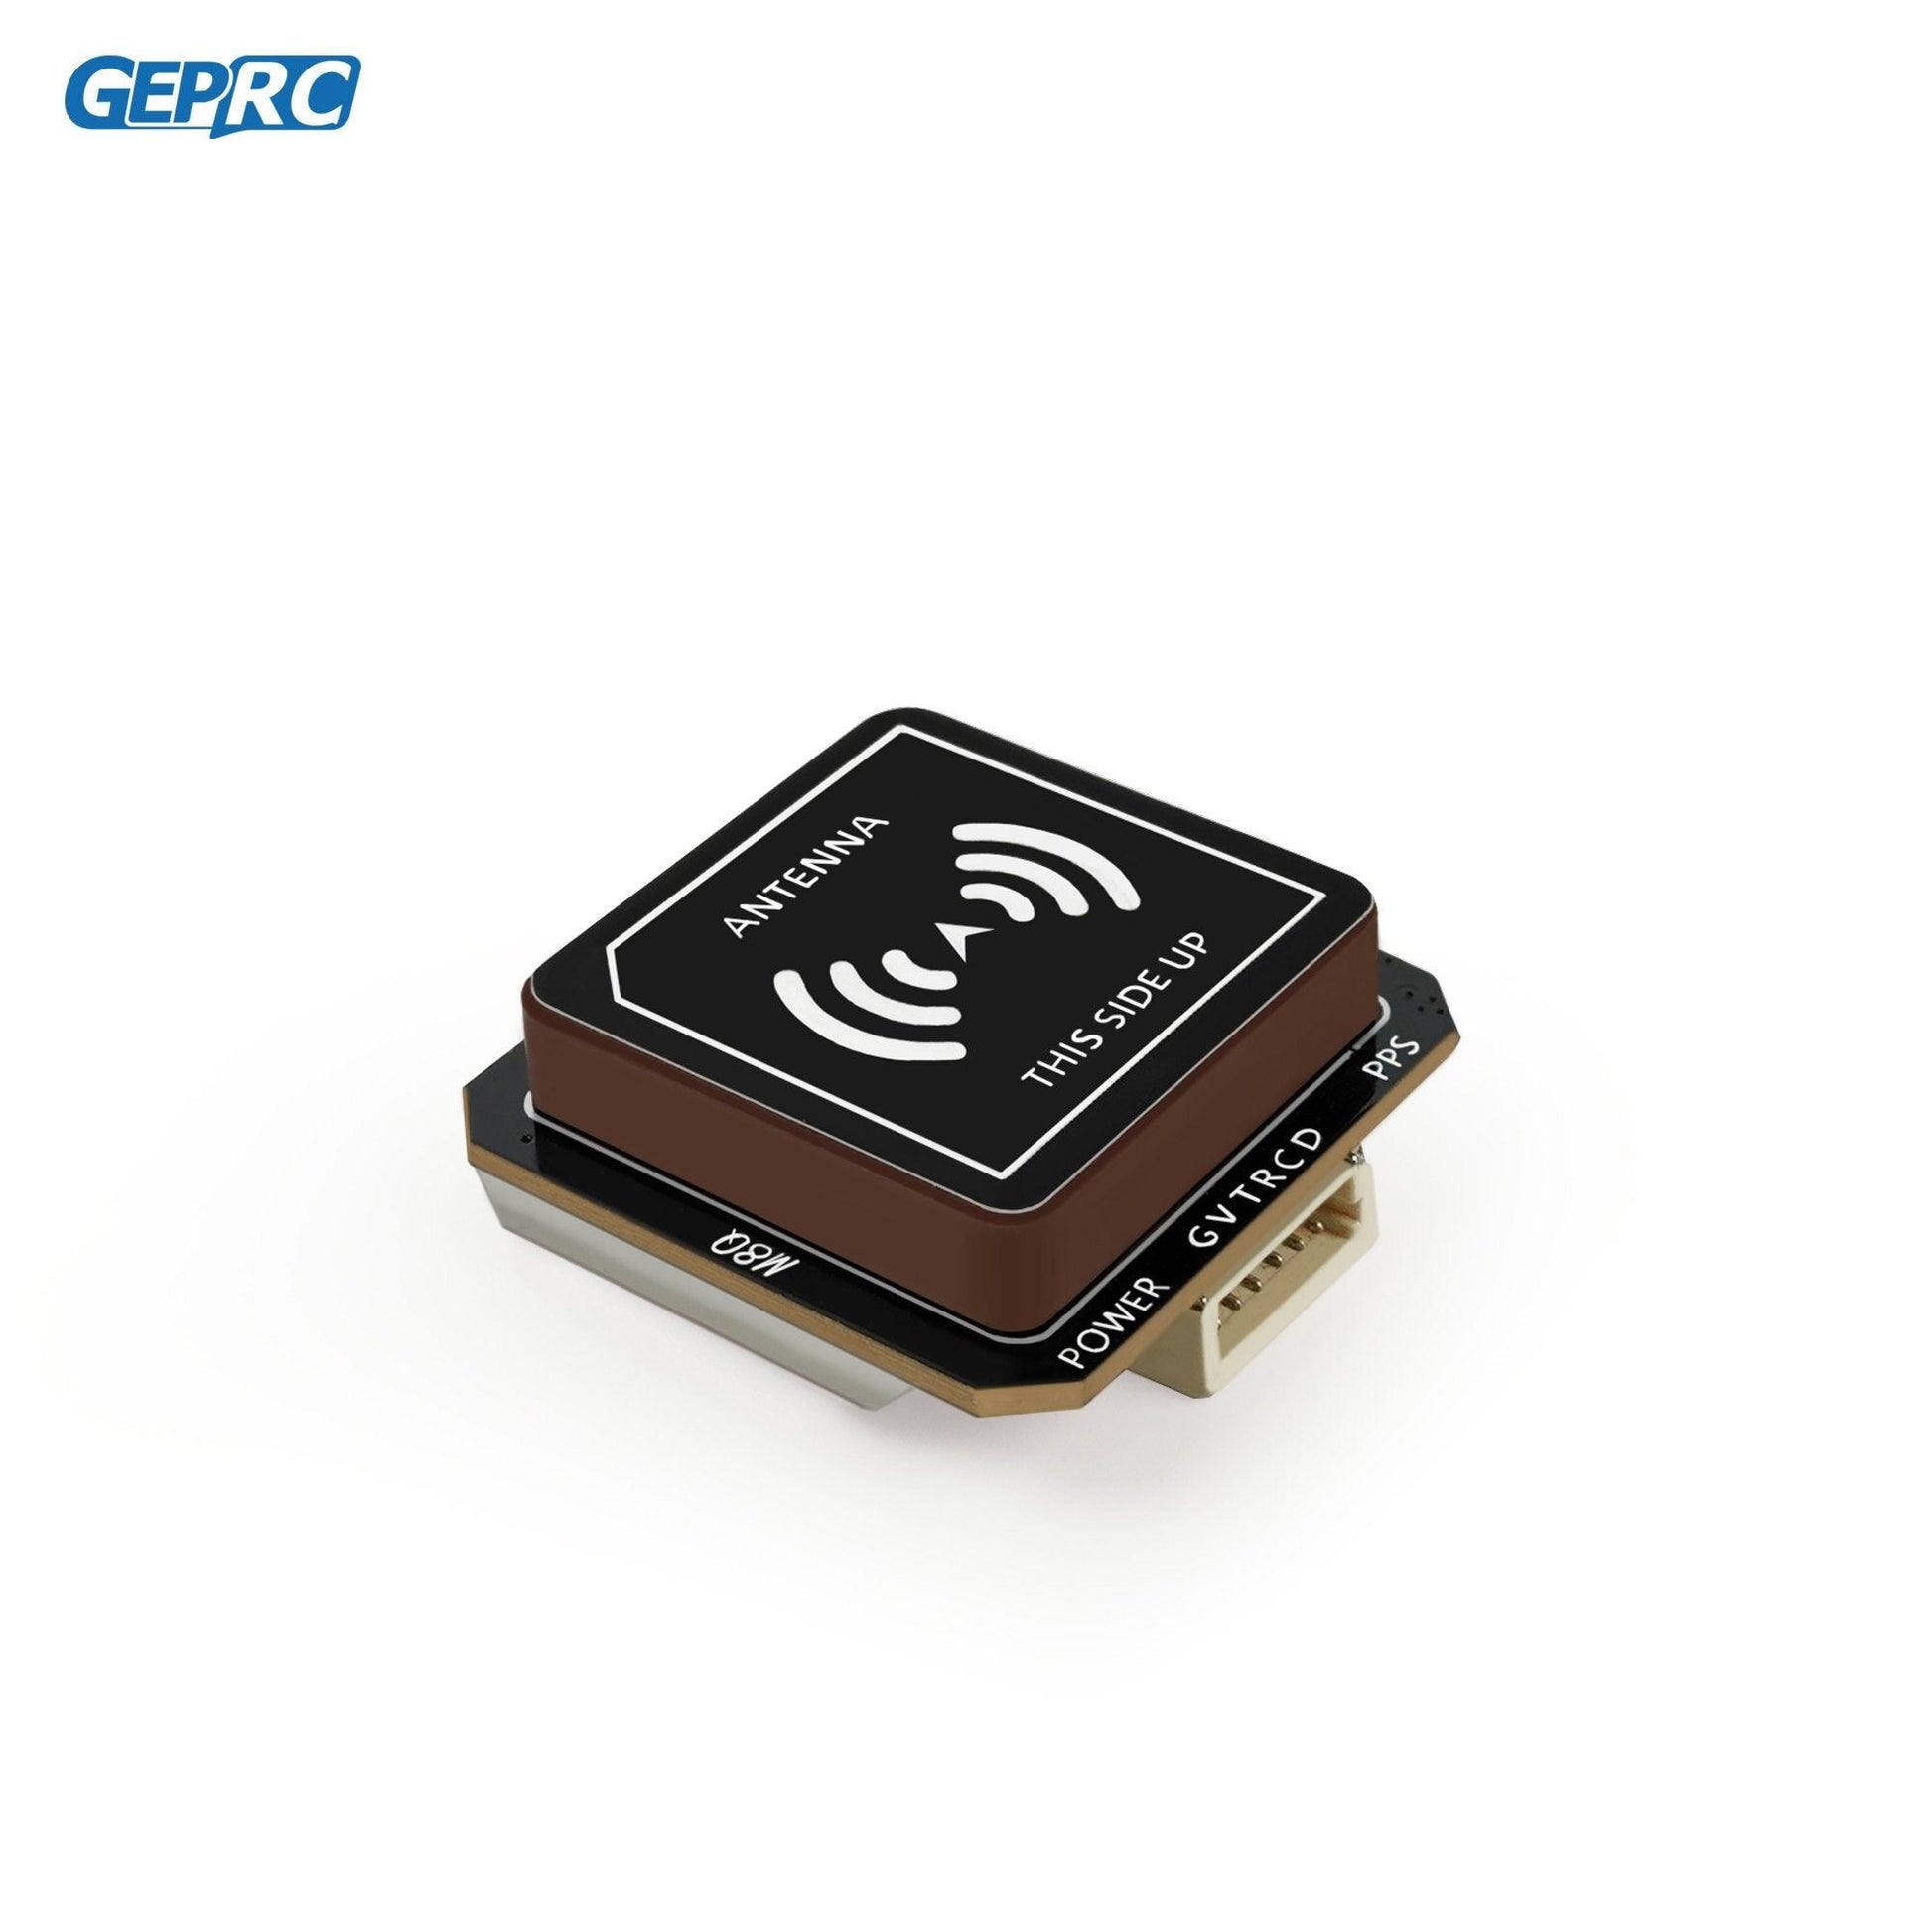 GEPRC GEP-M8Q GPS Module - Module Integrate BDS GLONASS Module SH1.0-6 Pin MS5611 Barometer Compass Farad Capacitor for FPV Drone - RCDrone